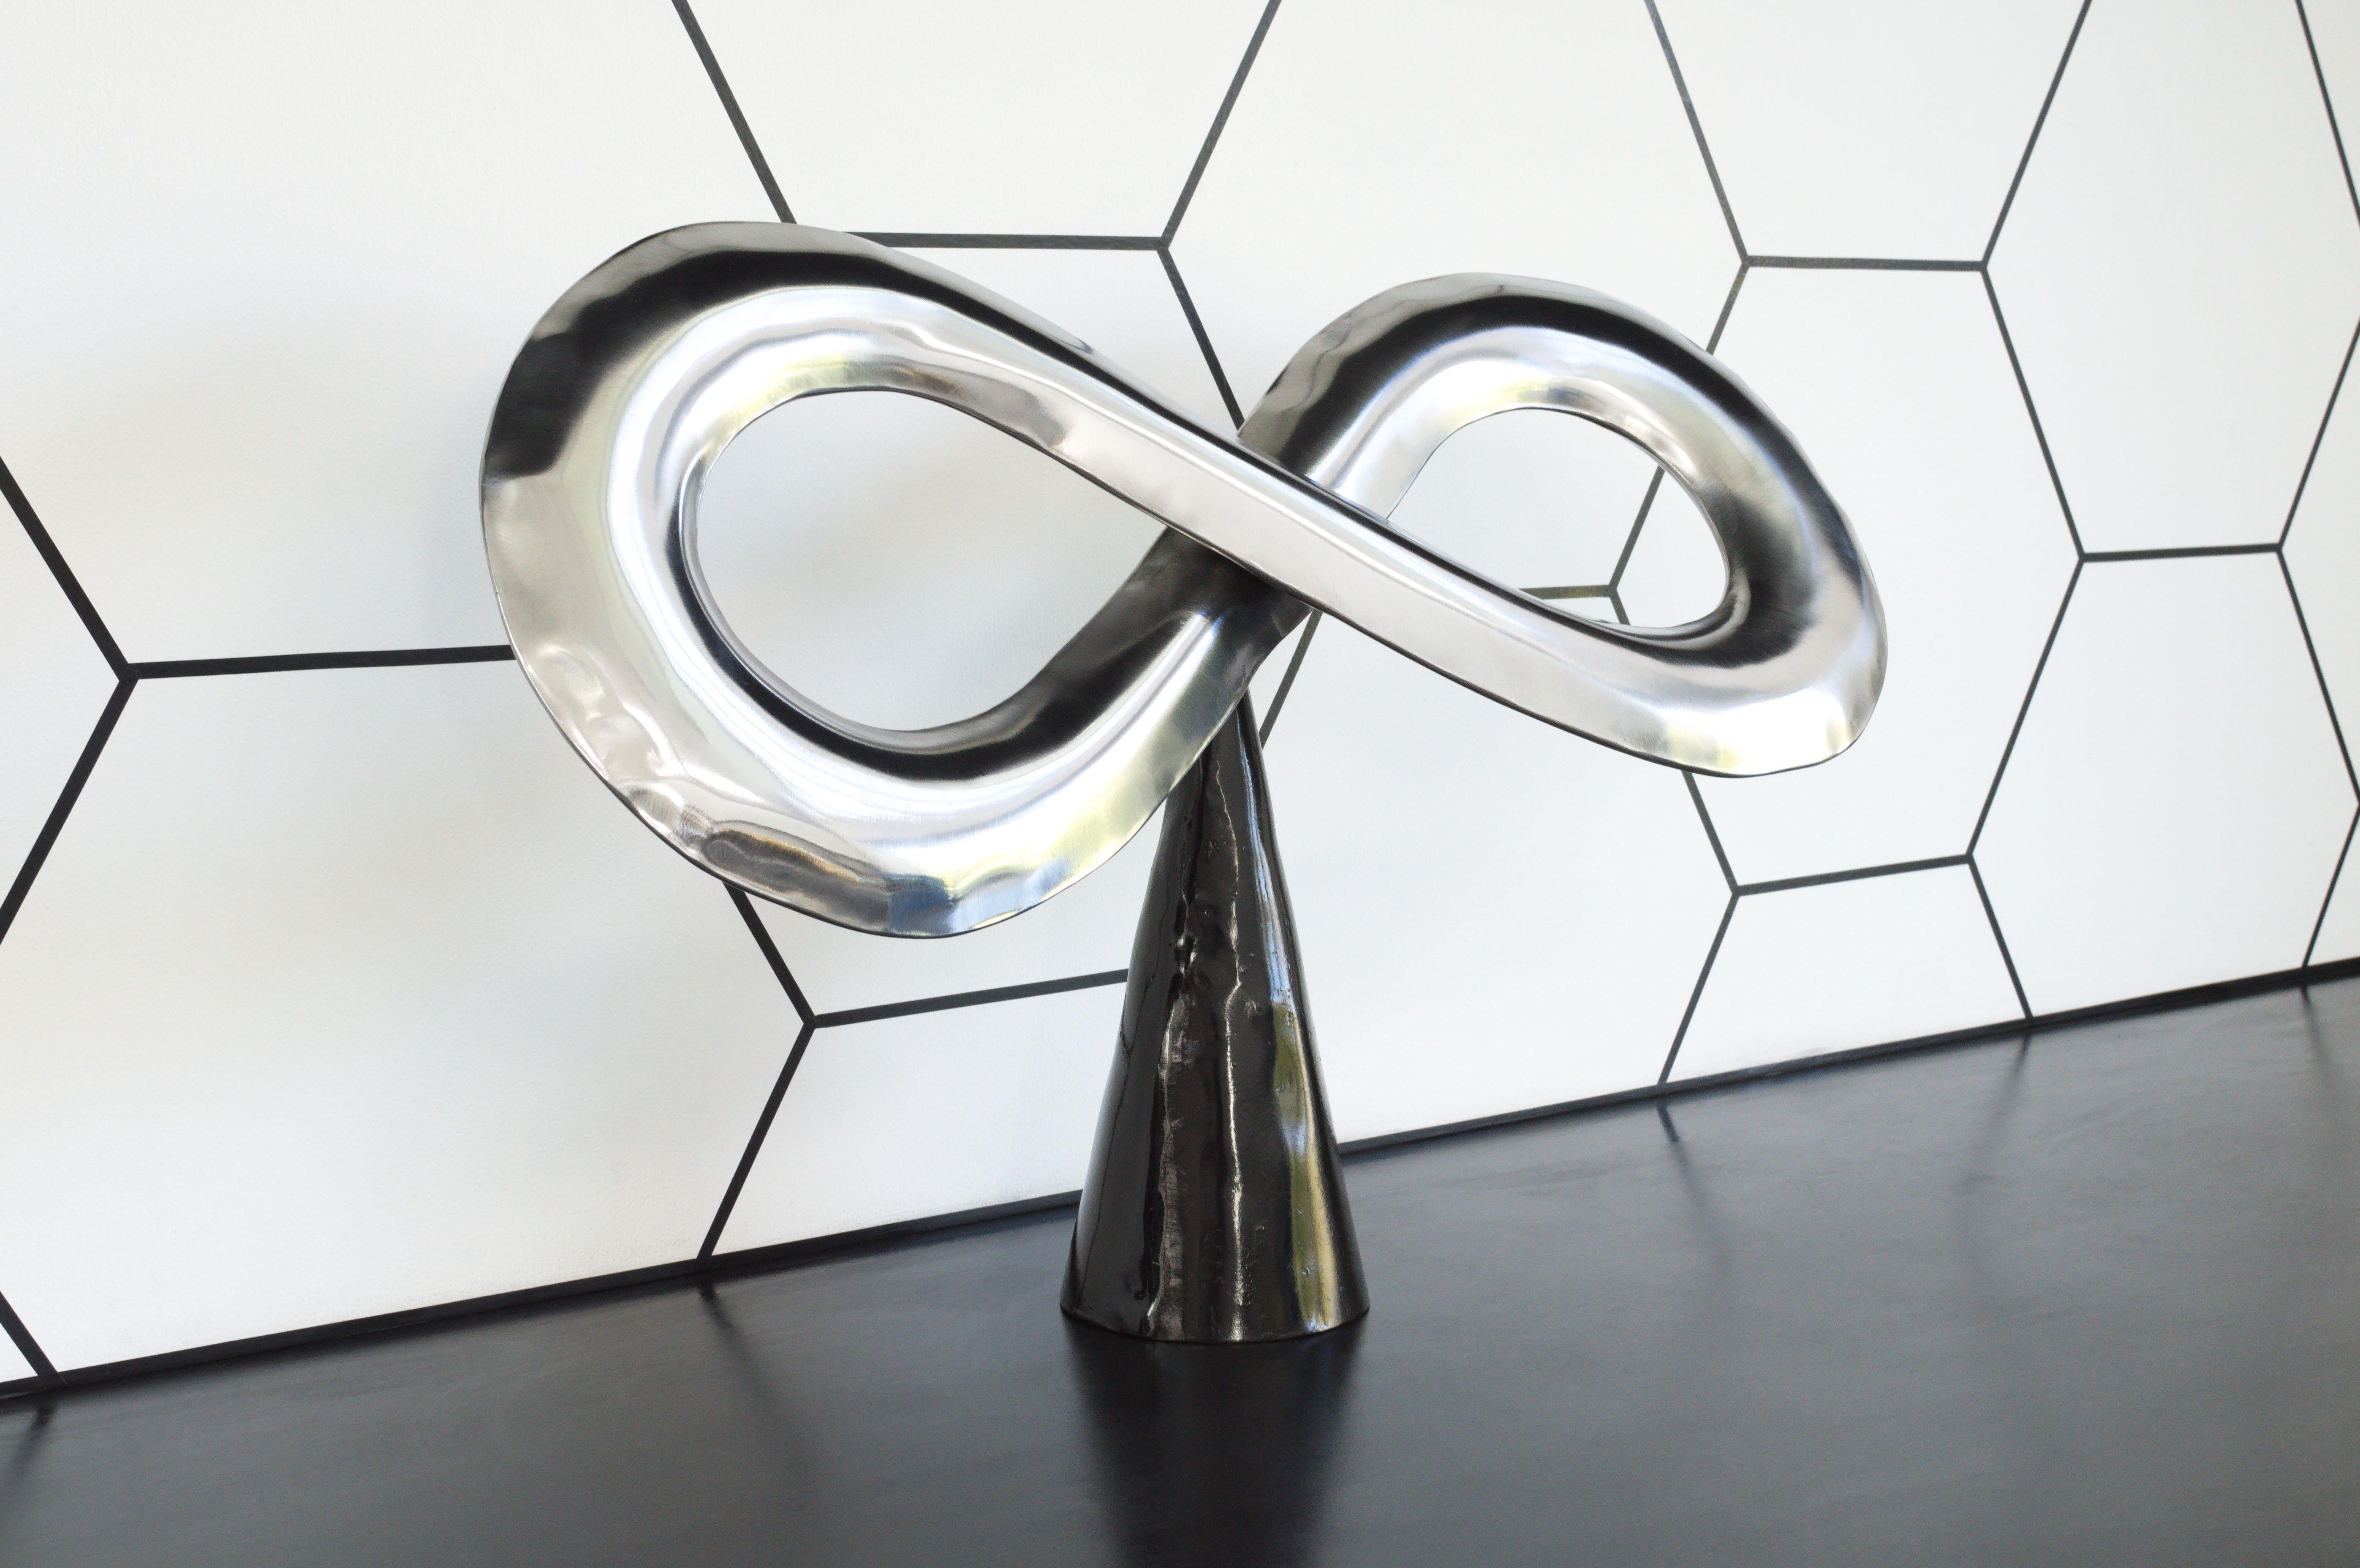 An inflated steel infinity symbol, created using the Hydroforming process. It was created as part of an ongoing exploration of new forms, to discover interesting possibilities and uses for the metal inflation process.

The base is created from